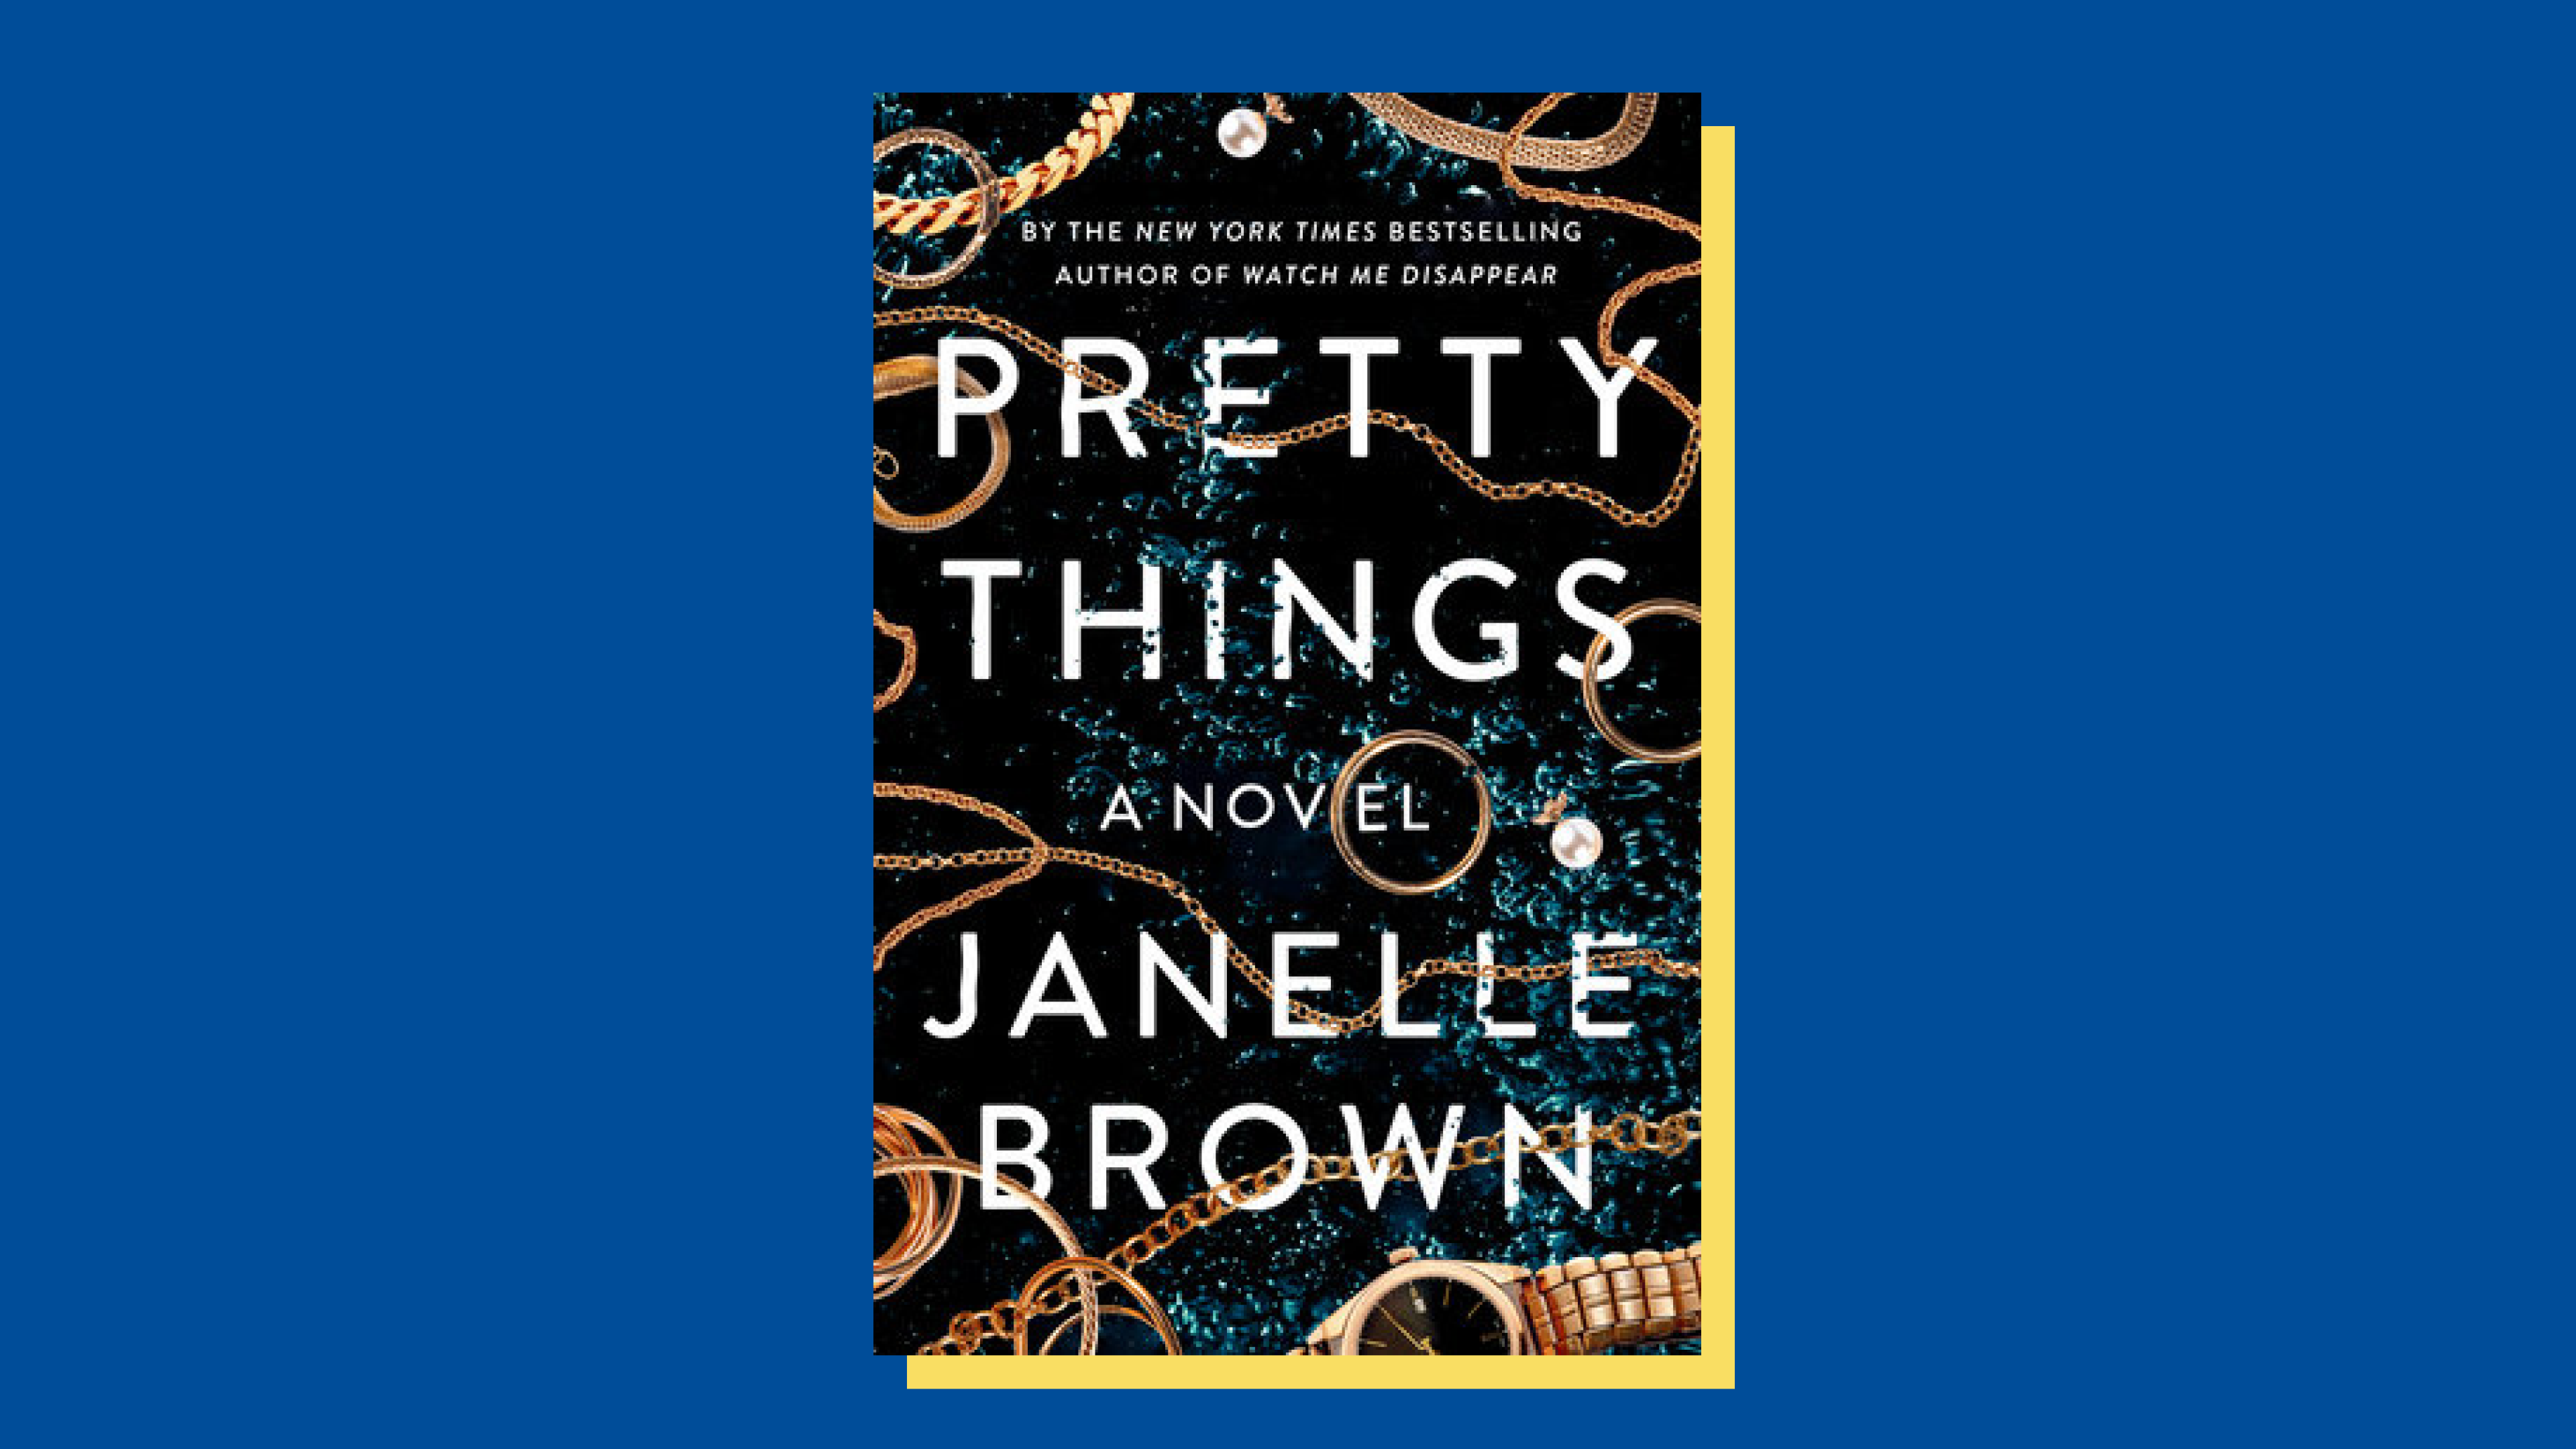 “Pretty Things” by Janelle Brown